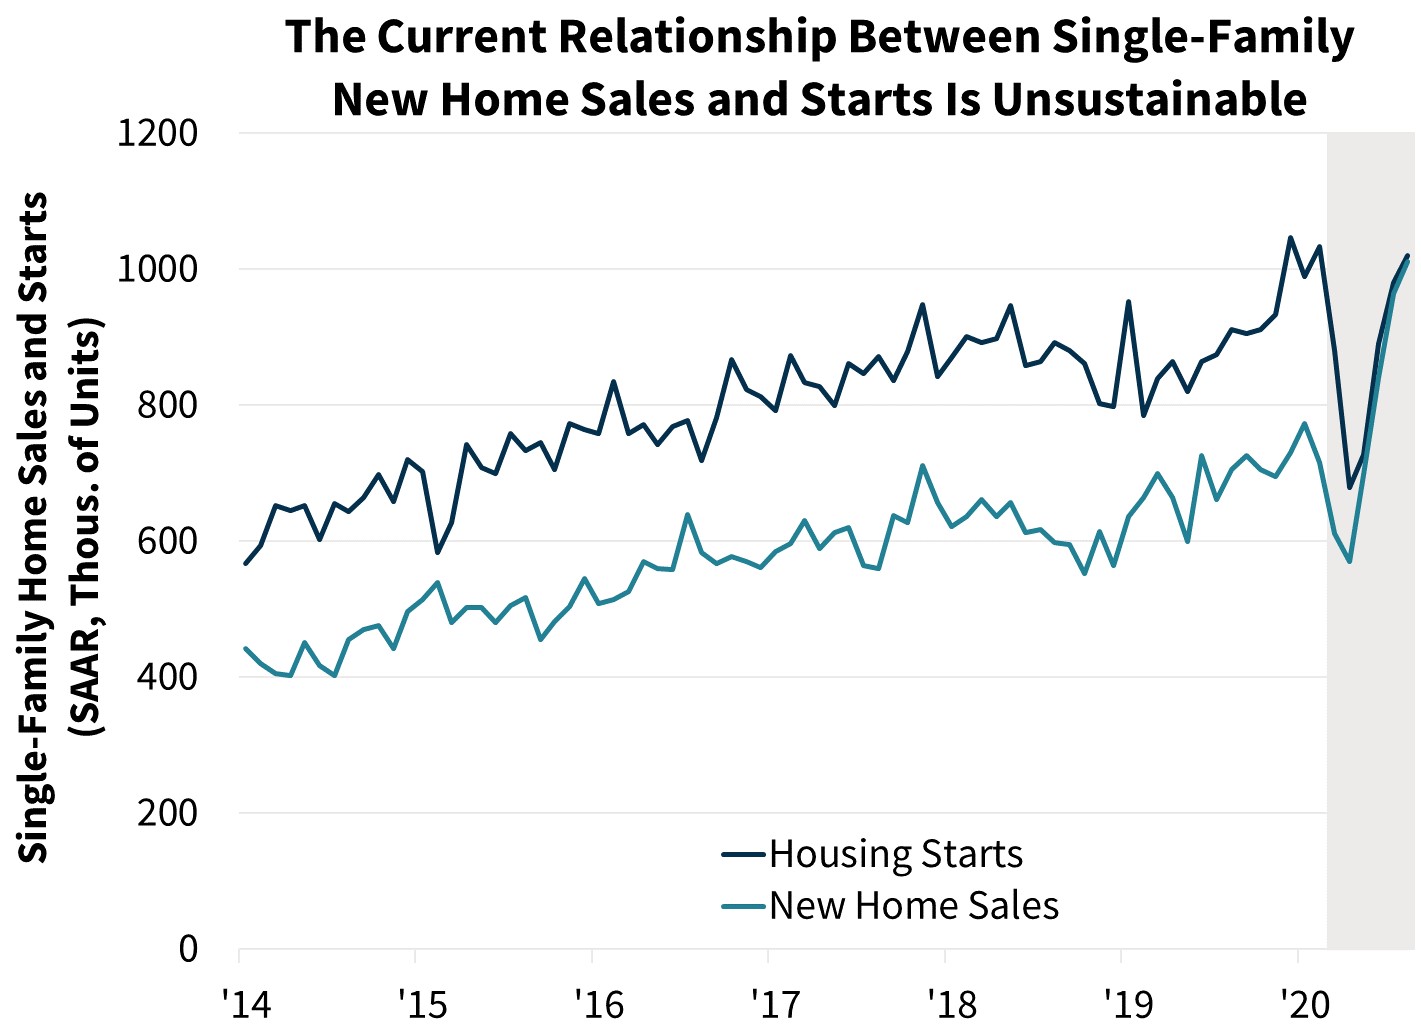  The Current Relationship Between Single-Family New Homes Sales and Starts is Unsustainable
